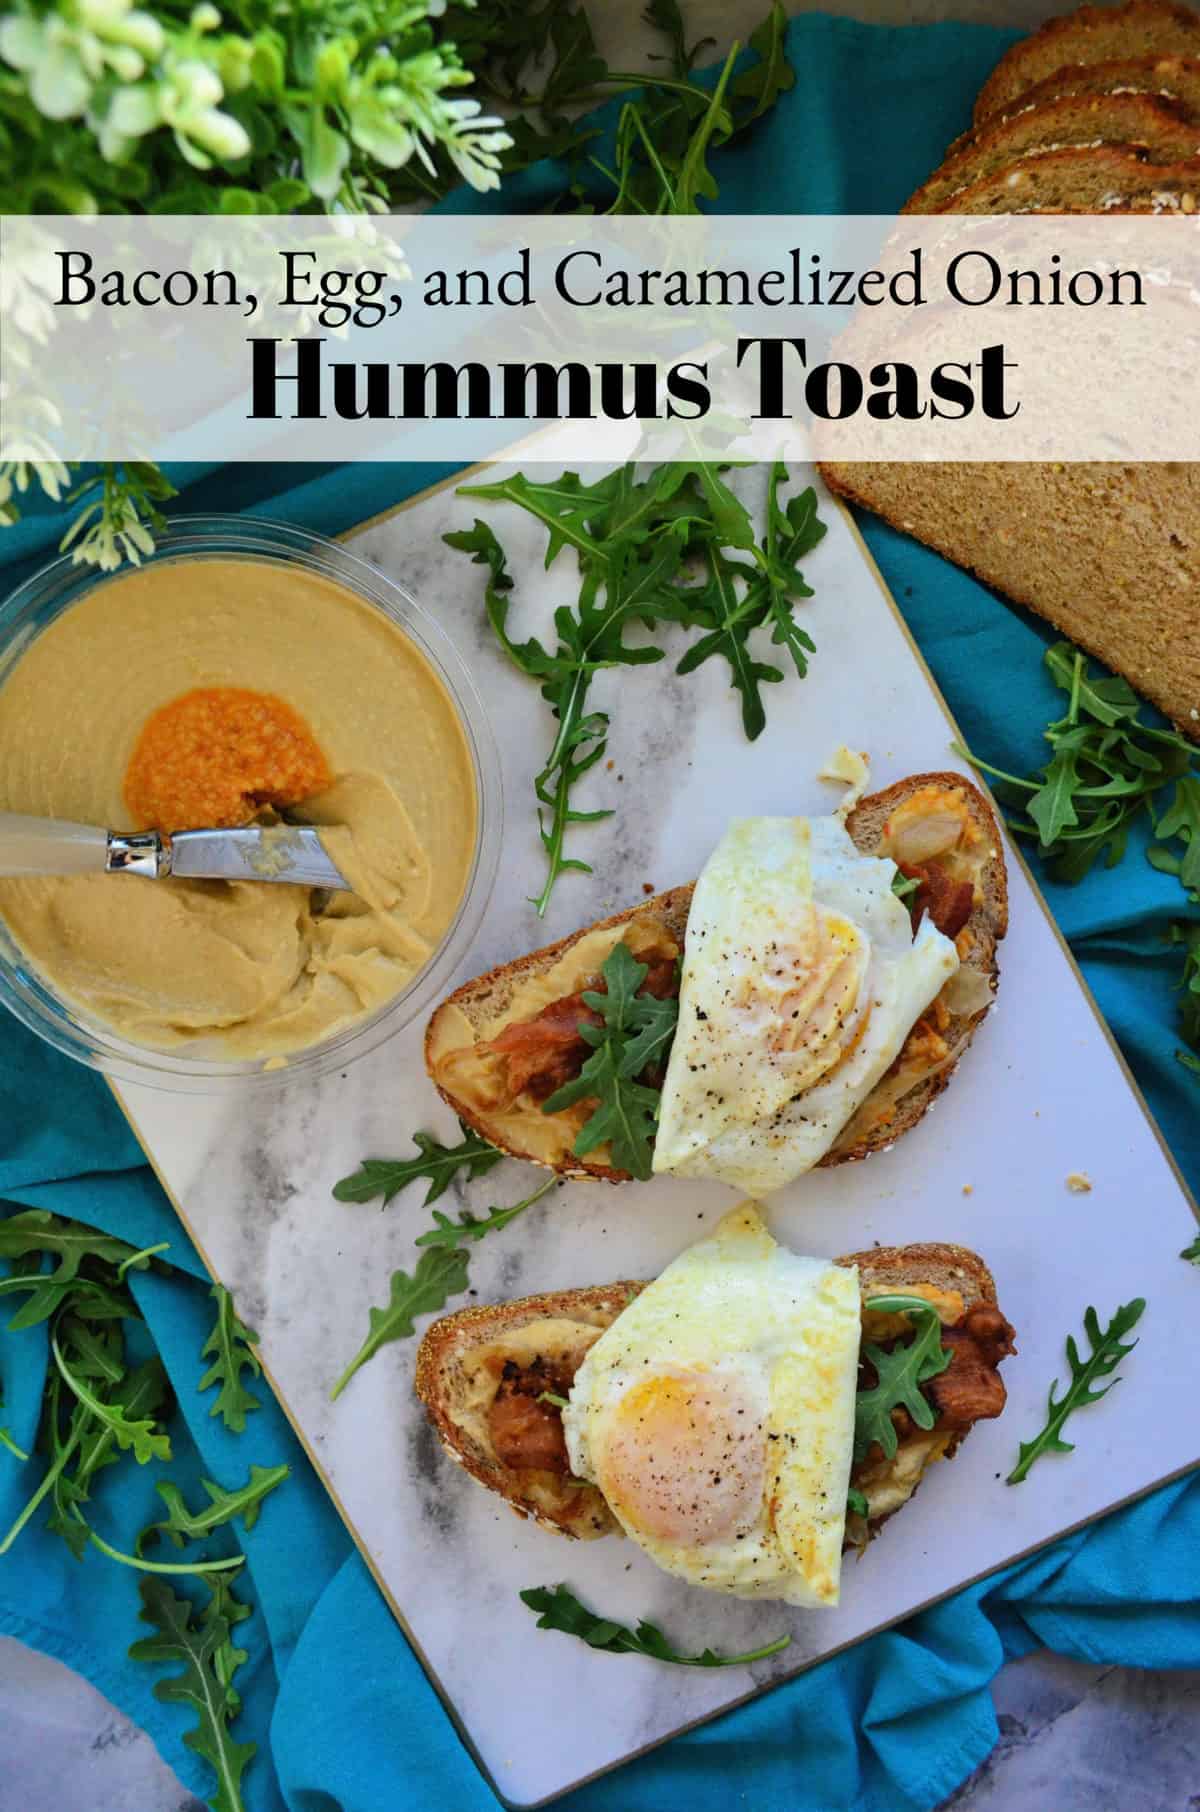 Hummus container, bread topped with hummus, bacon, eggs, arugula on platter with title text.